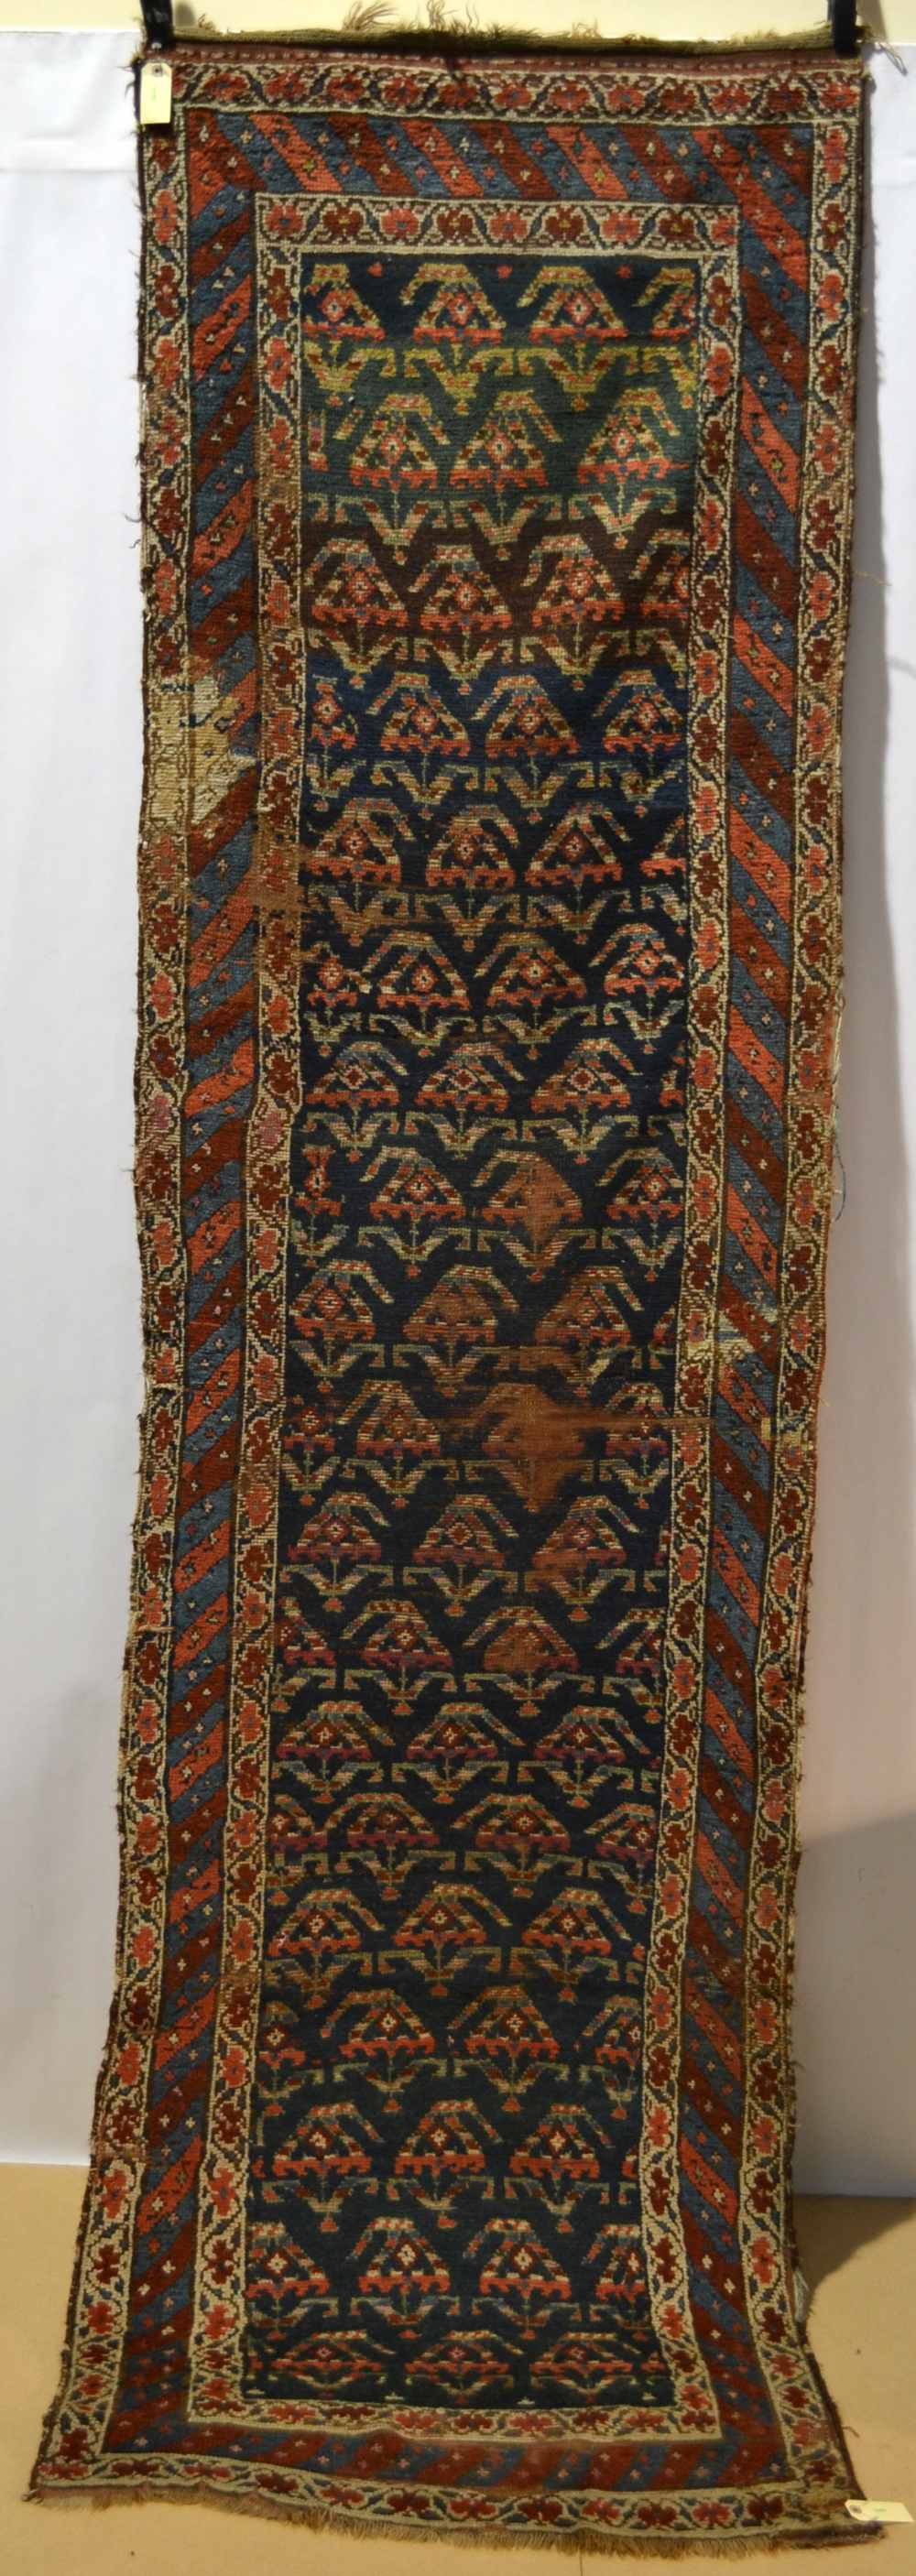 Kurdish runner, north west Persia, early 20th century, 10ft. 5in. x 2ft. 10in. 3.17m. x 0.86m.